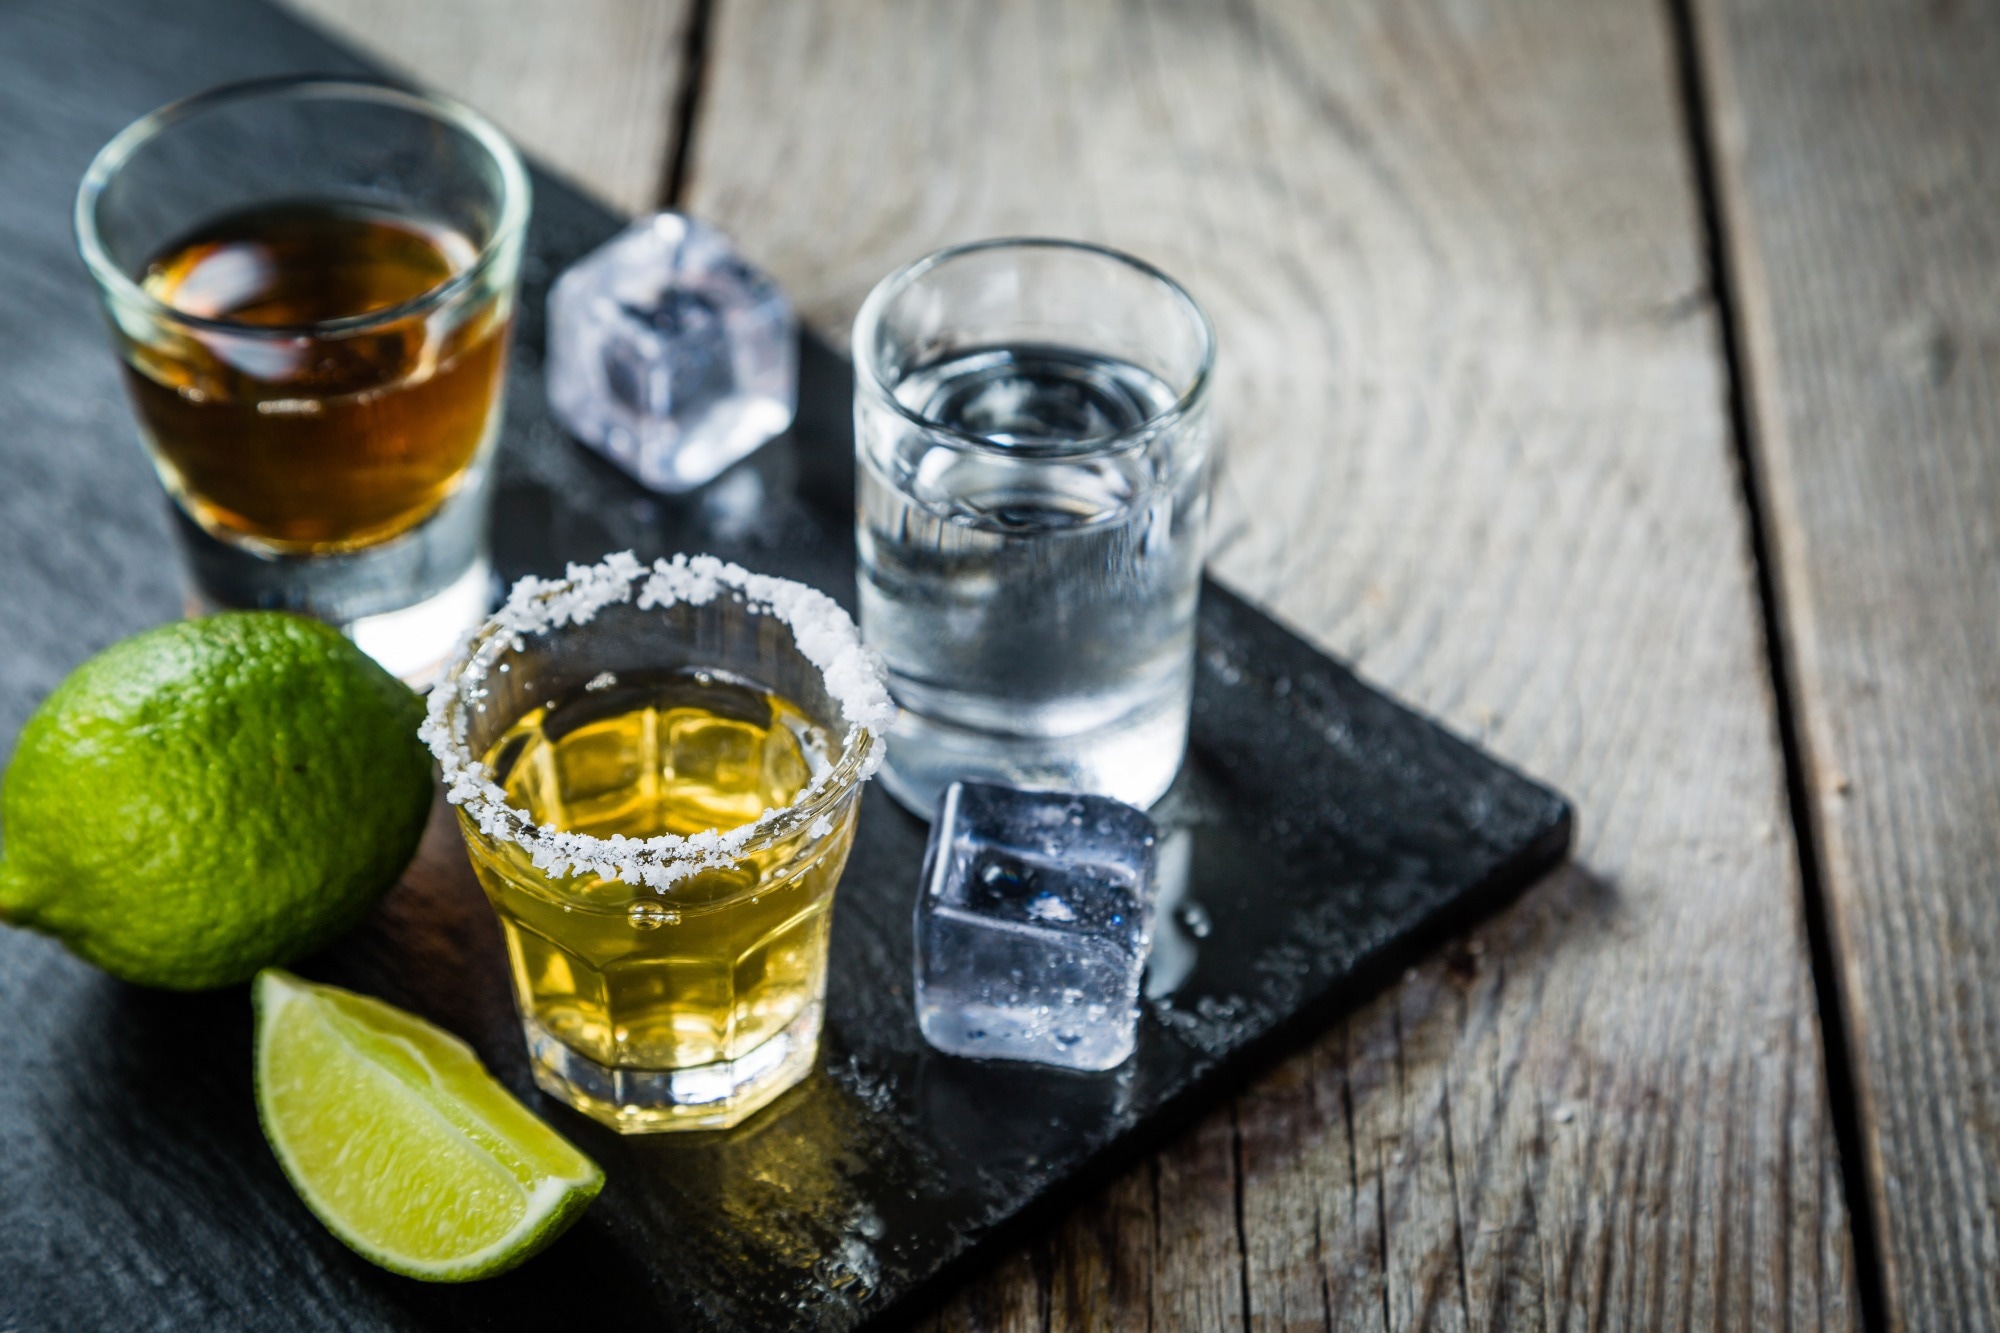 Study: Improving alcohol health literacy and reducing alcohol consumption: recommendations for Germany. Image Credit: Oleksandra Naumenko / Shutterstock.com